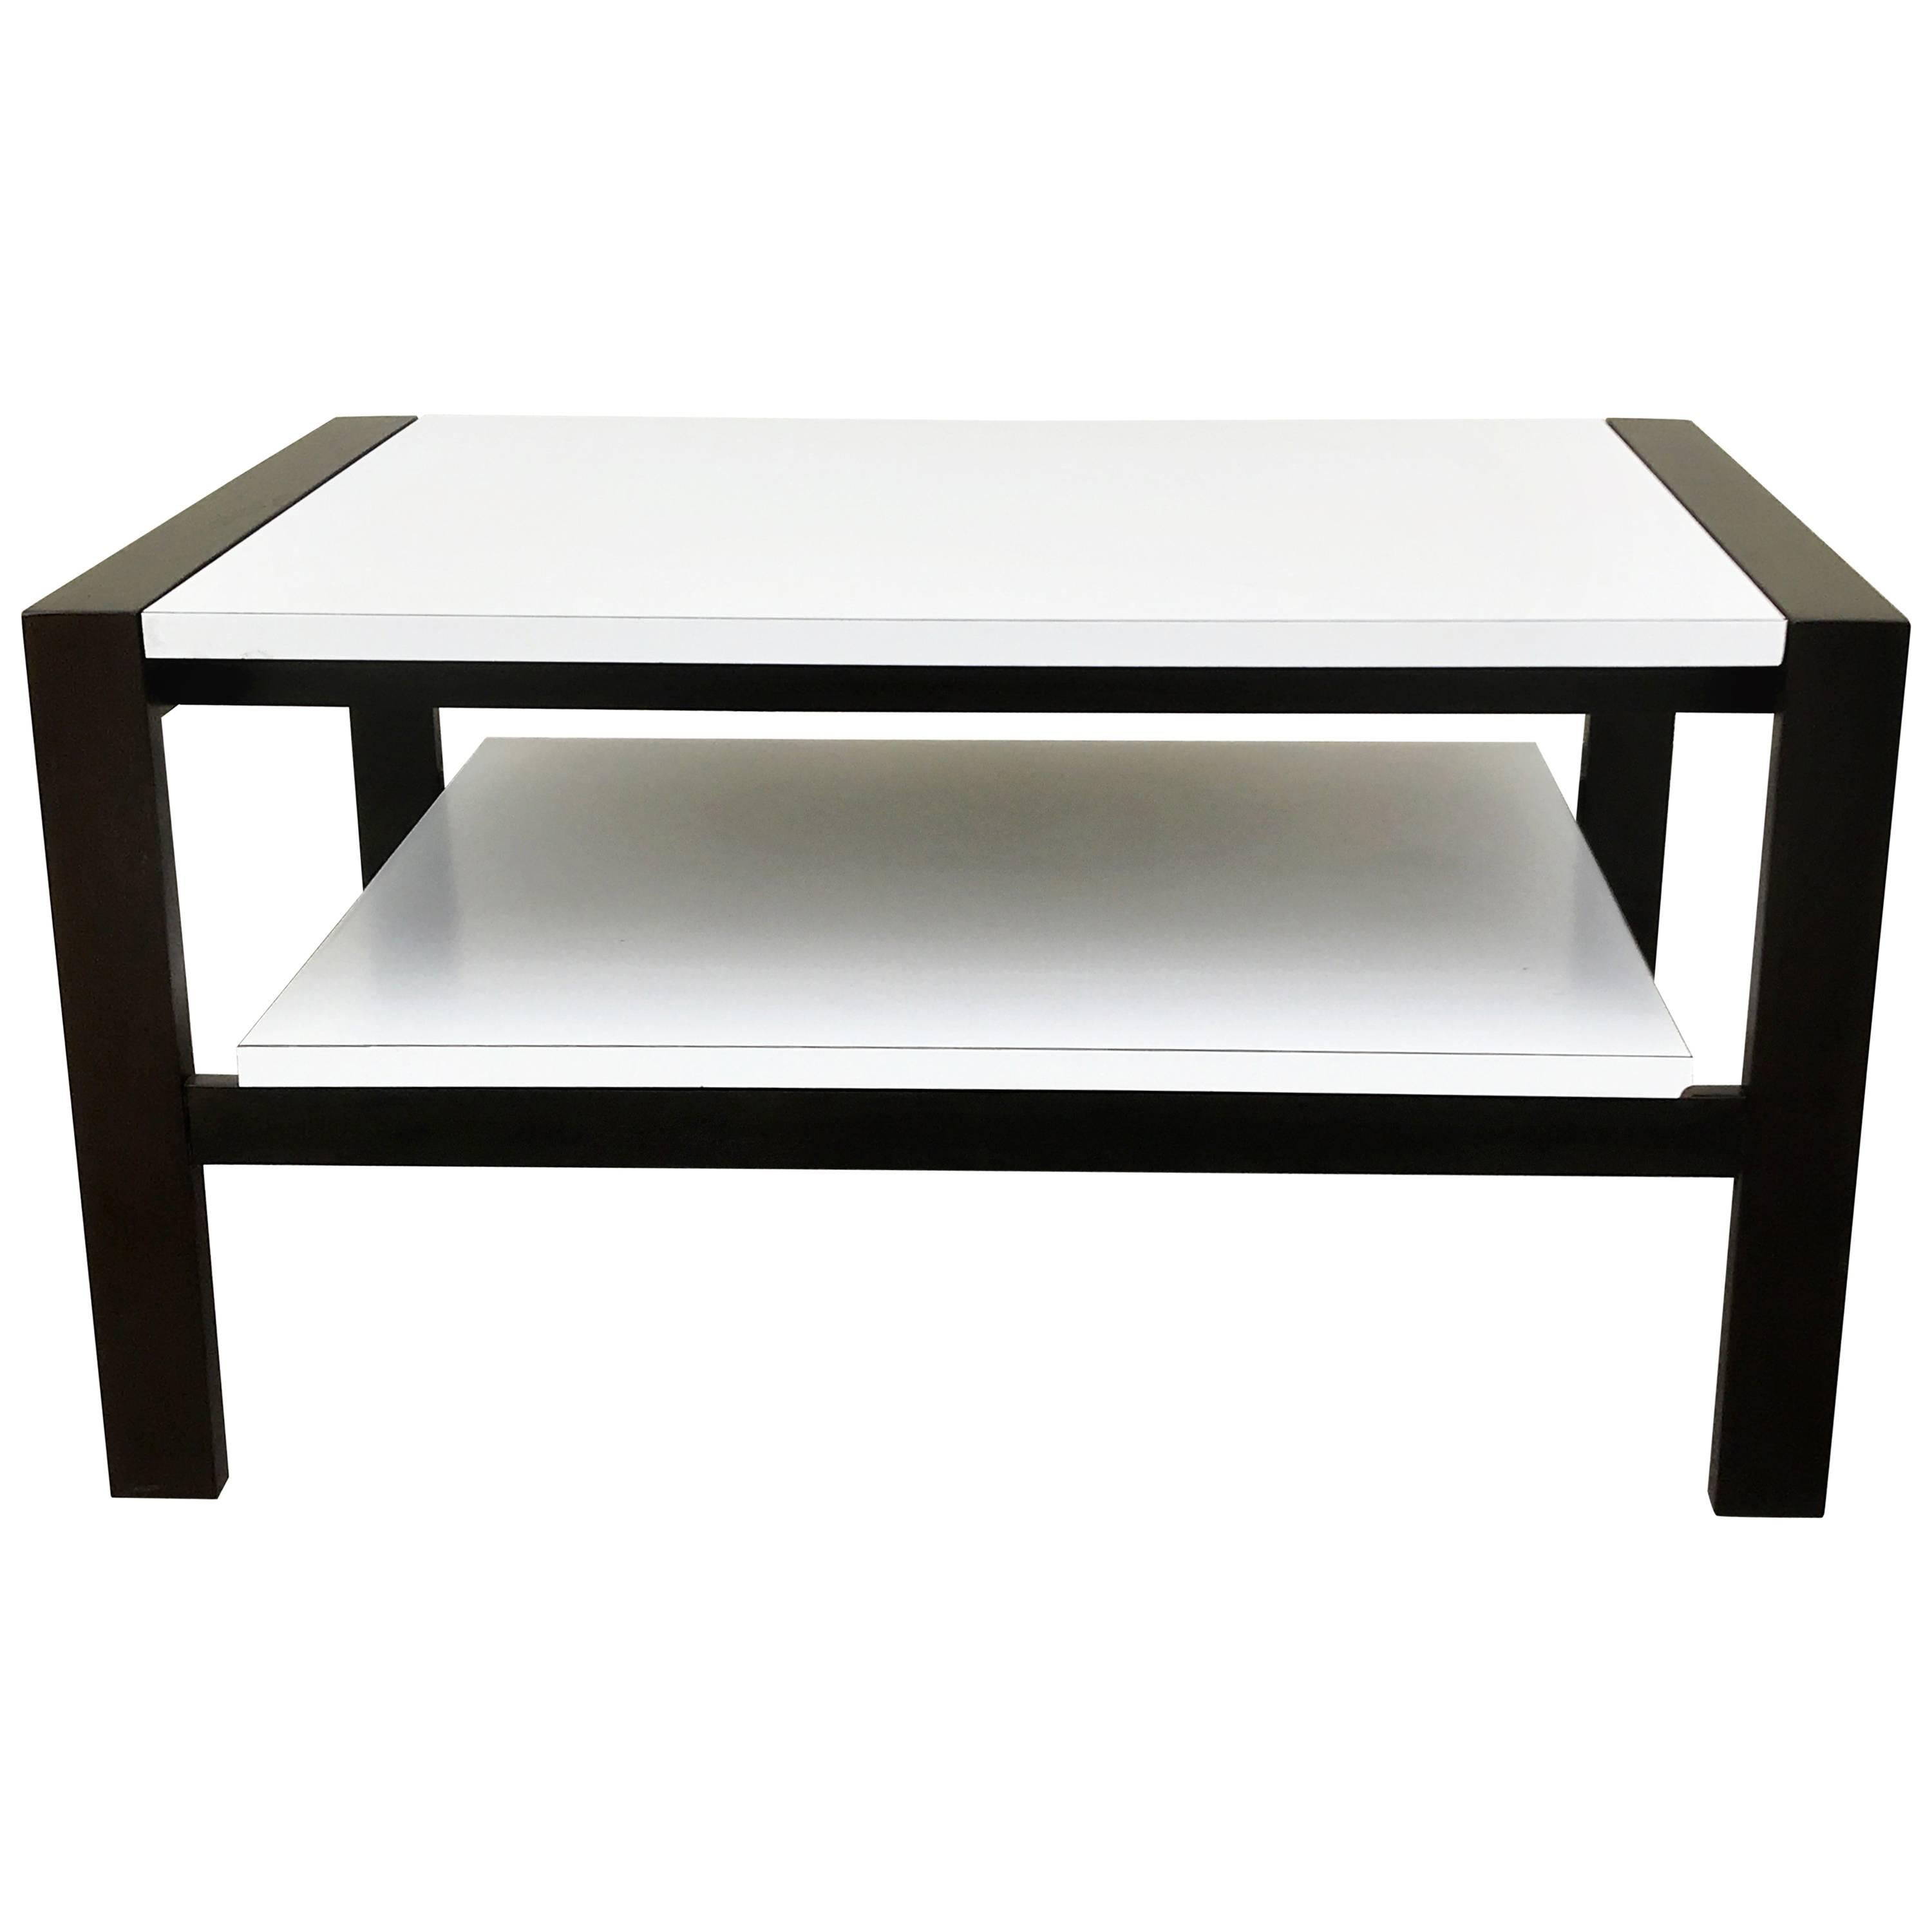 This white formica and dark stained mahogany coffee table features two tiers. The bottom shelf can be pulled out and adjusted at the required length as visible in our 2nd photo. The wood frame of the table has been newly refinished in an espresso